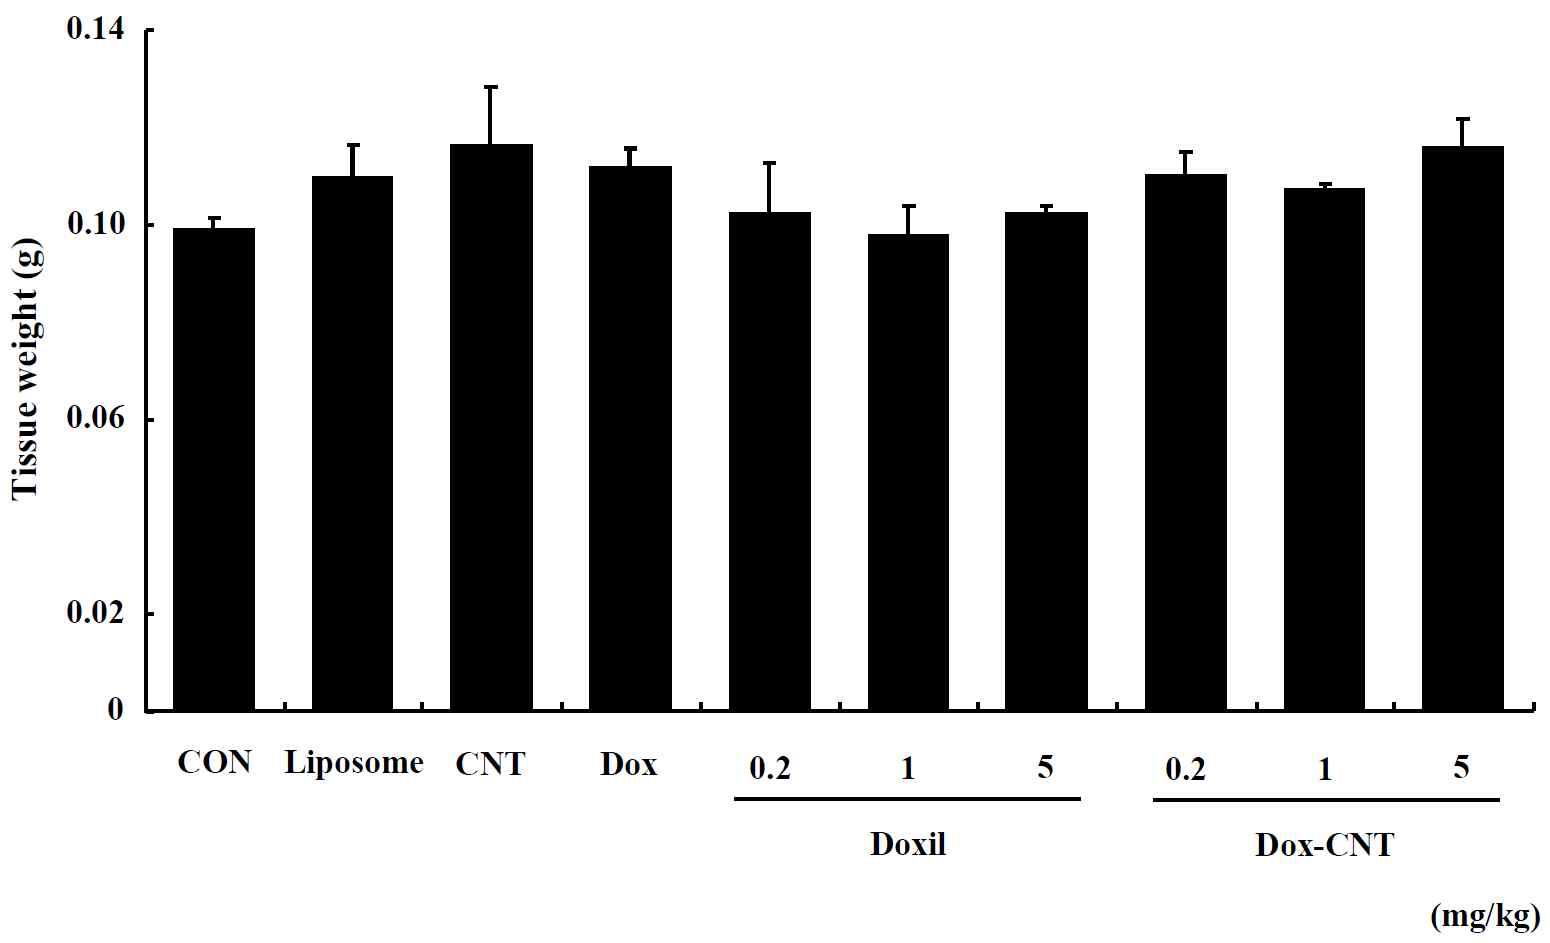 The change of spleen weight in single exposed male ICR mice for 14 days. Mice were respectively administered by intravenous injection with liposome, CNT, Dox, Doxil (0.2, 1, 5 mg/kg) and Dox-CNT (0.2, 1, 5 mg/kg). The results are presented as mean ± SE (n = 10). * p < 0.05, significantly different from the control.